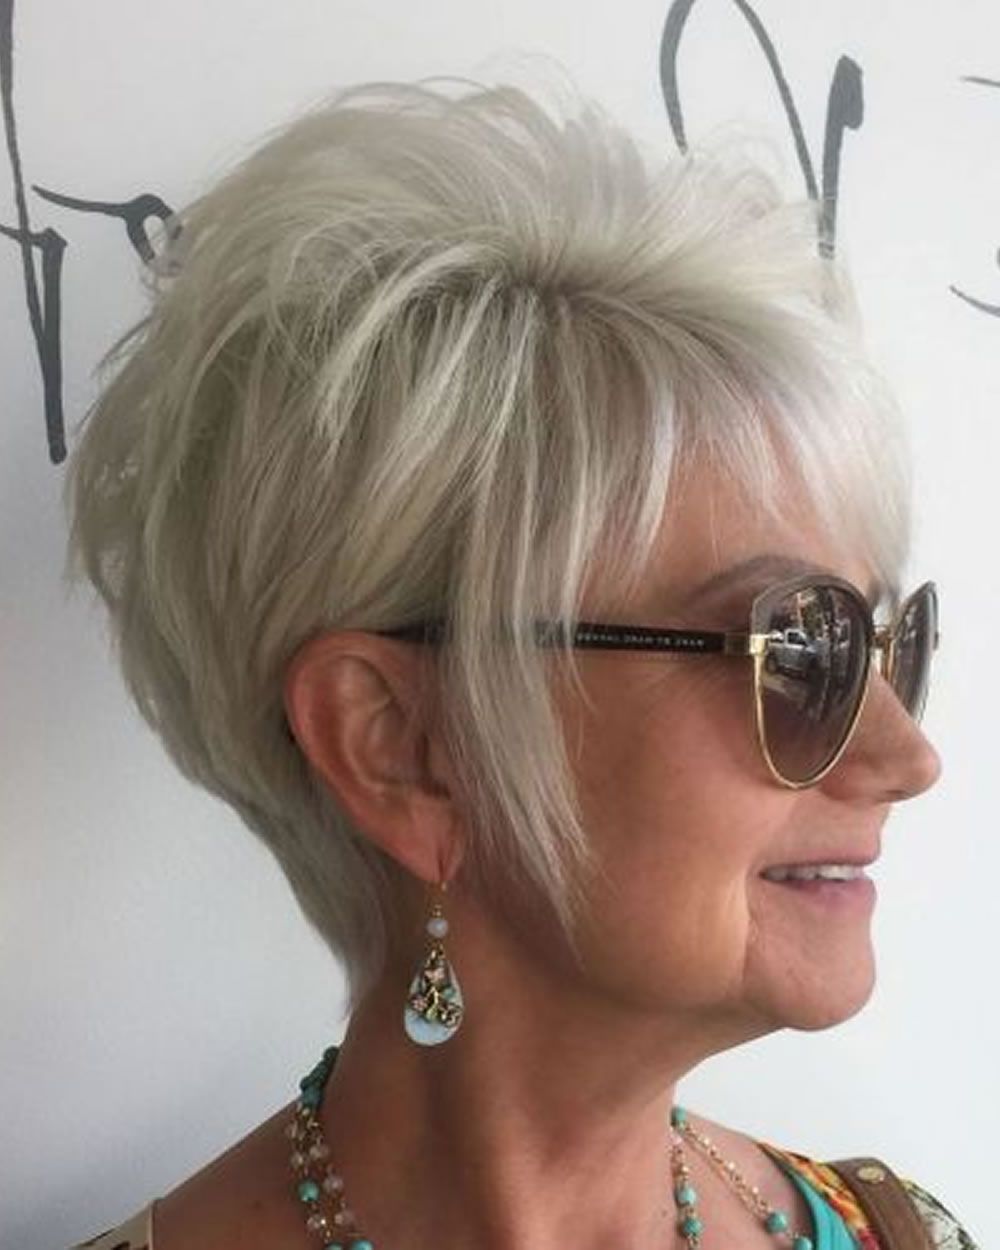 Pixie Short Haircuts For Older Women Over 50 & 2018 2019 Short Inside Short Hairstyles For Women Over 50 With Straight Hair (View 14 of 25)